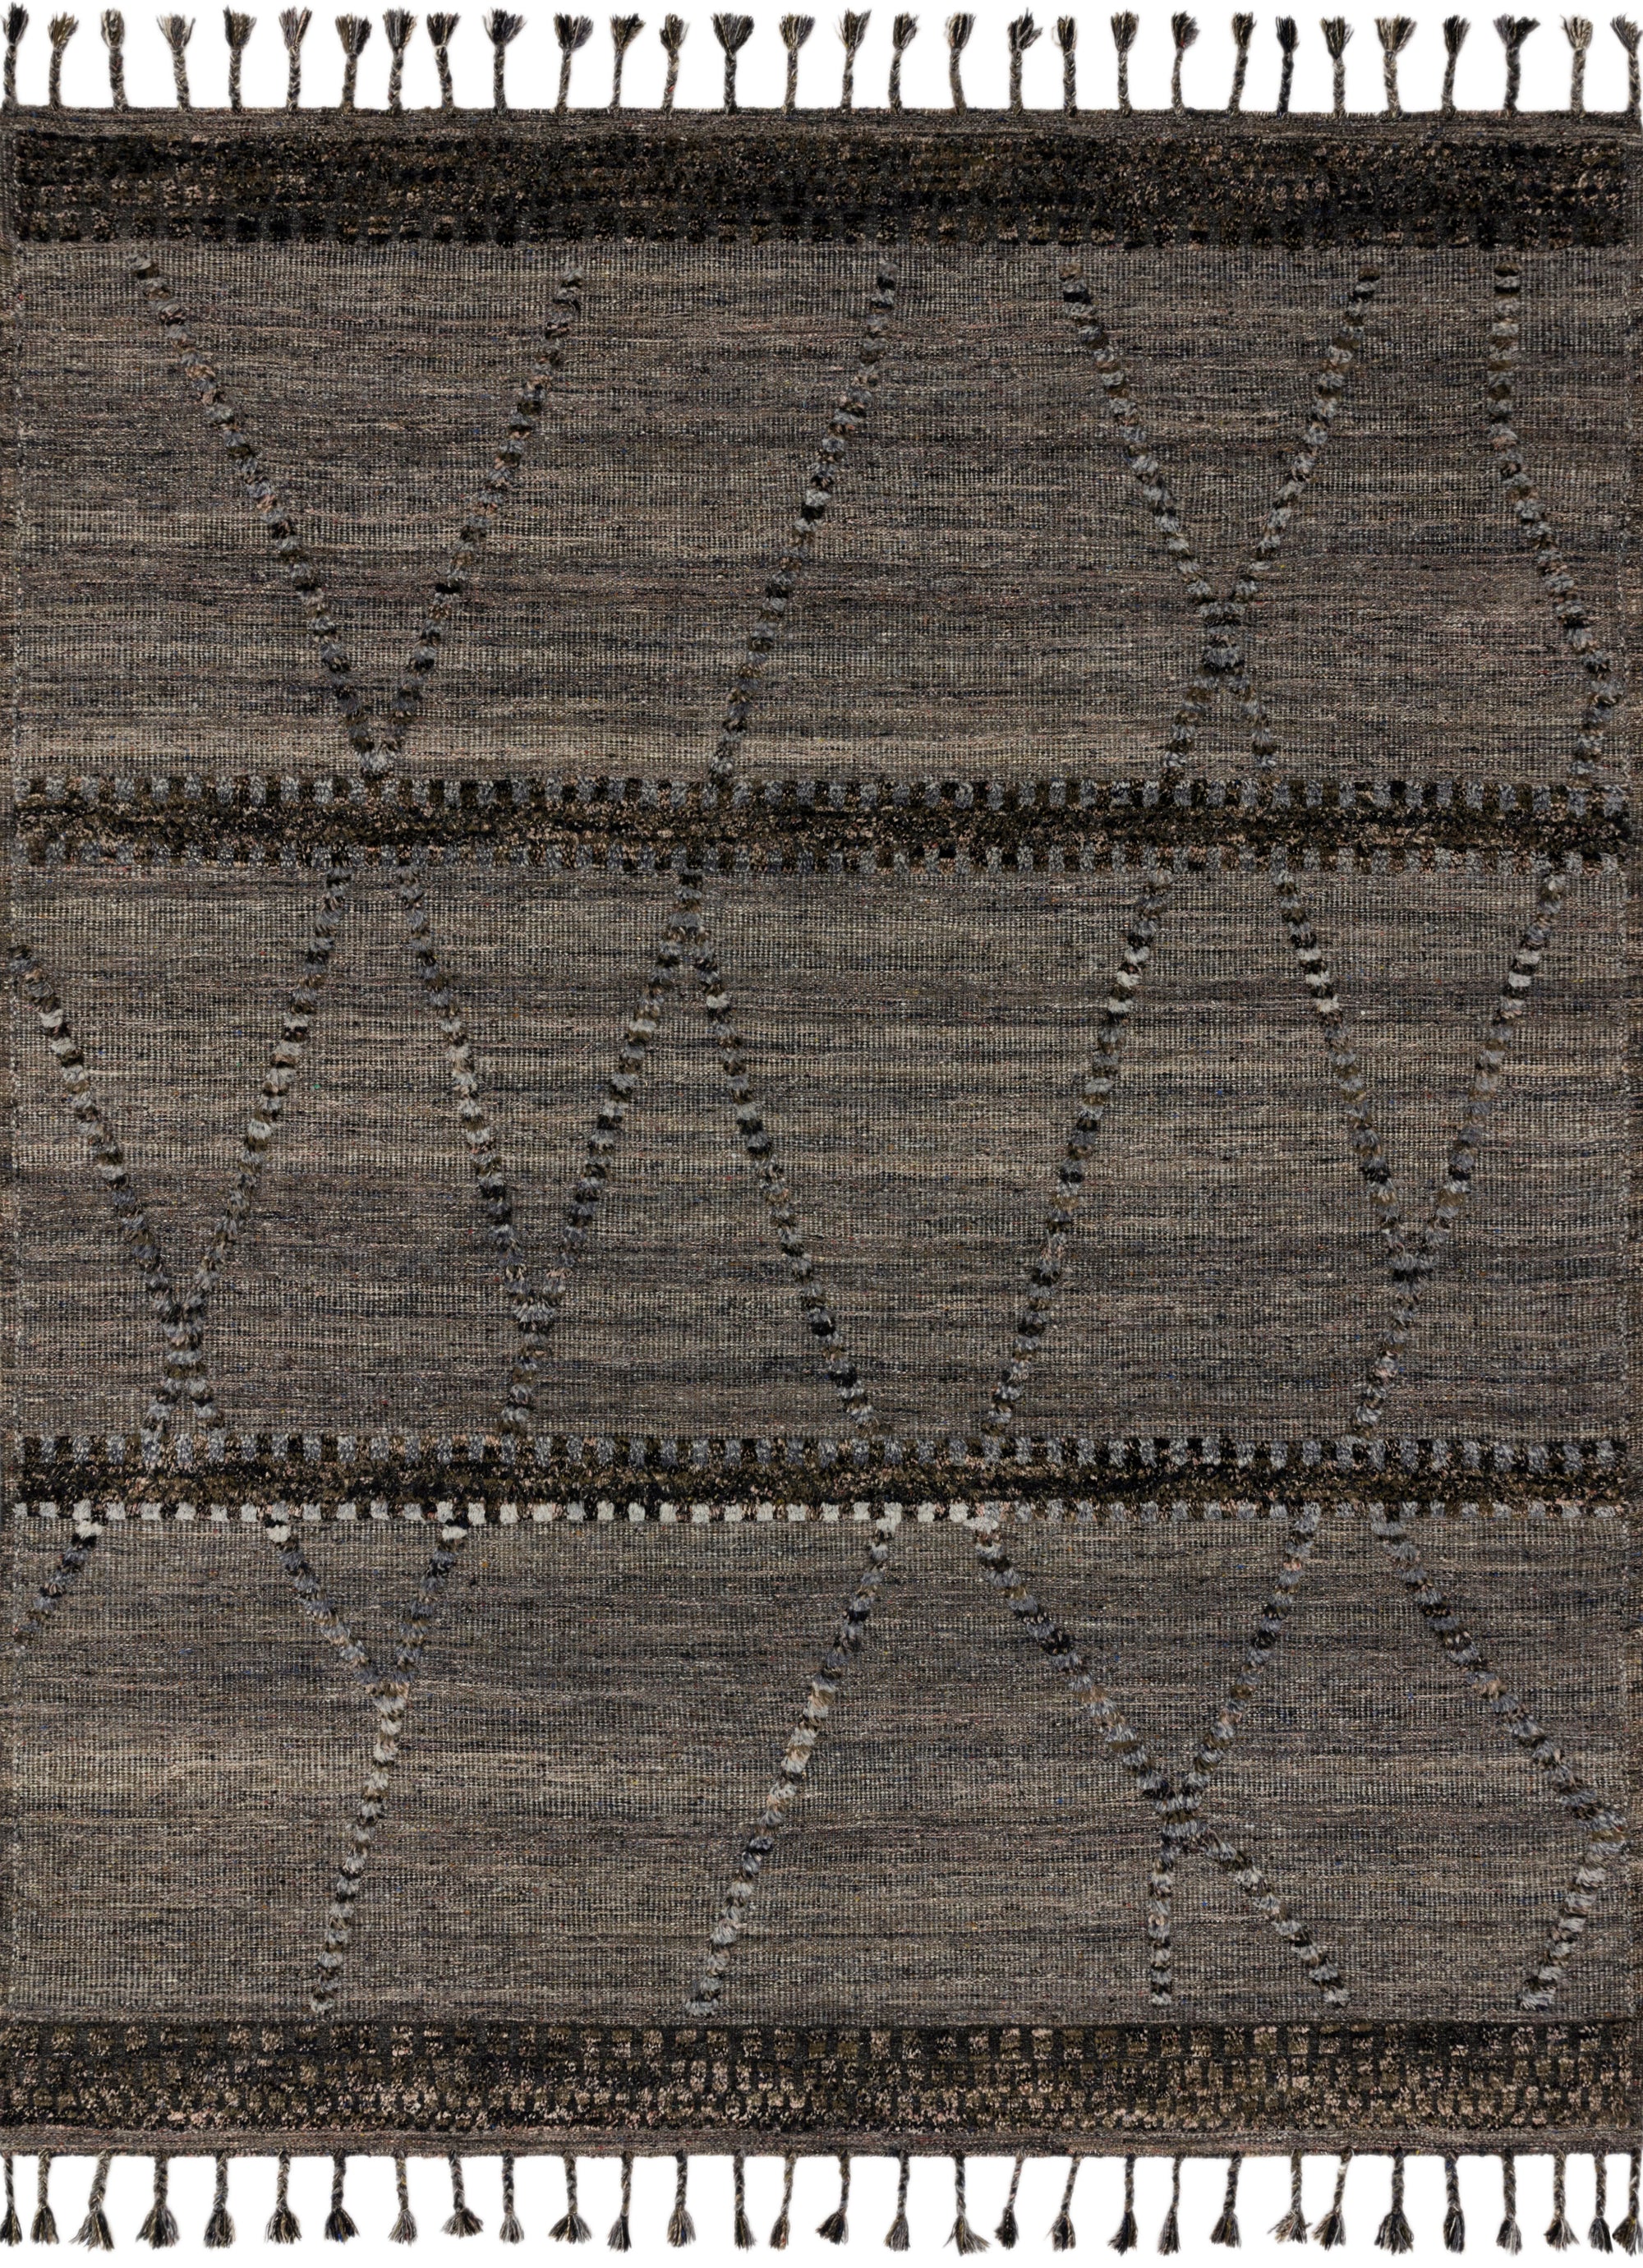 Iman Rug: Adding Texture and Personality to Your Decor